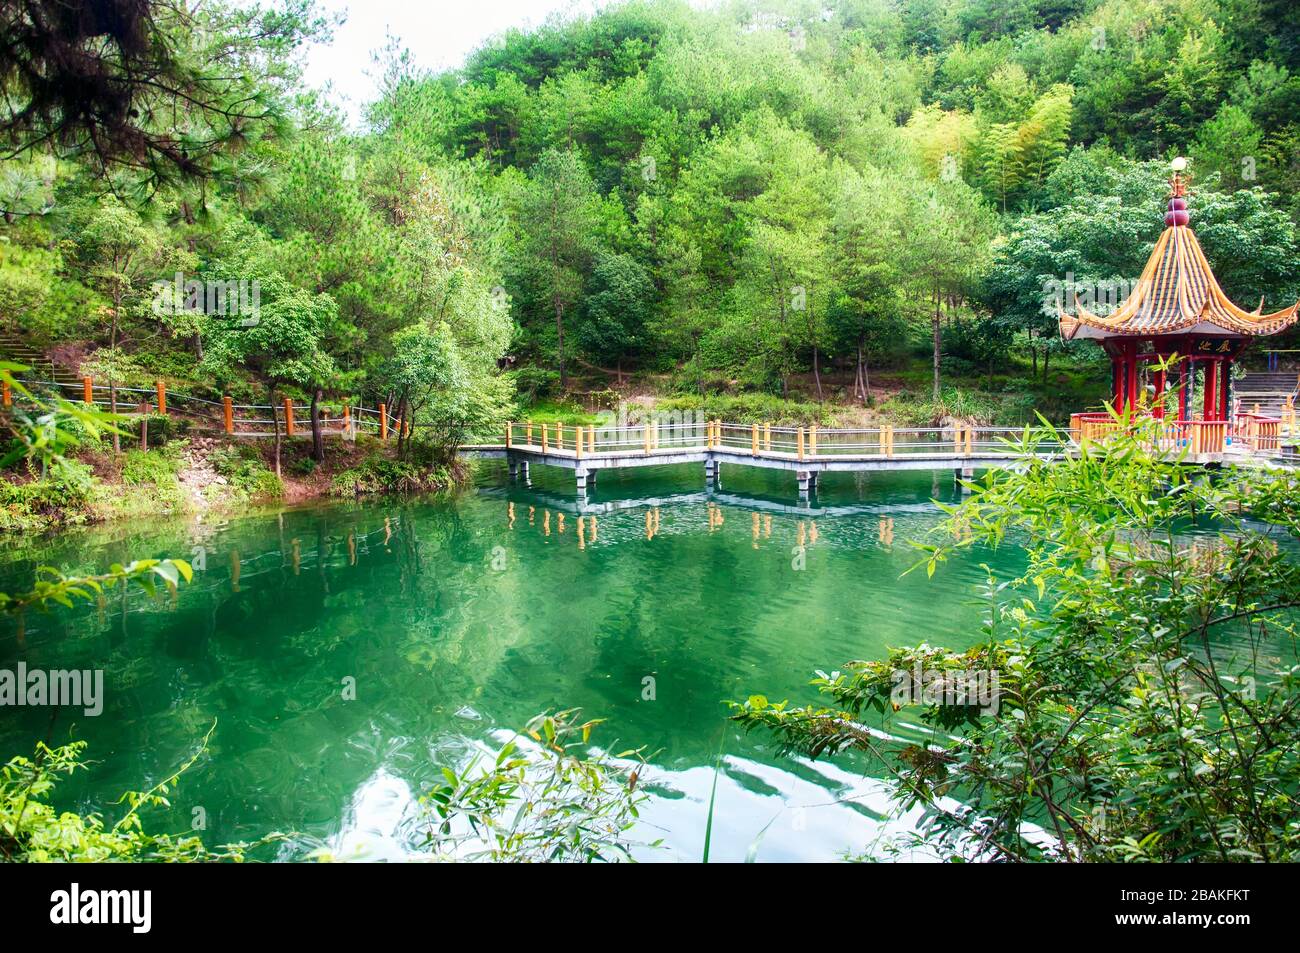 A green lake and chinese gazebo at the feng huang shan gong yuan or phoenix mountain park in Lishui China on an overcast day in Zhejiang province. Stock Photo